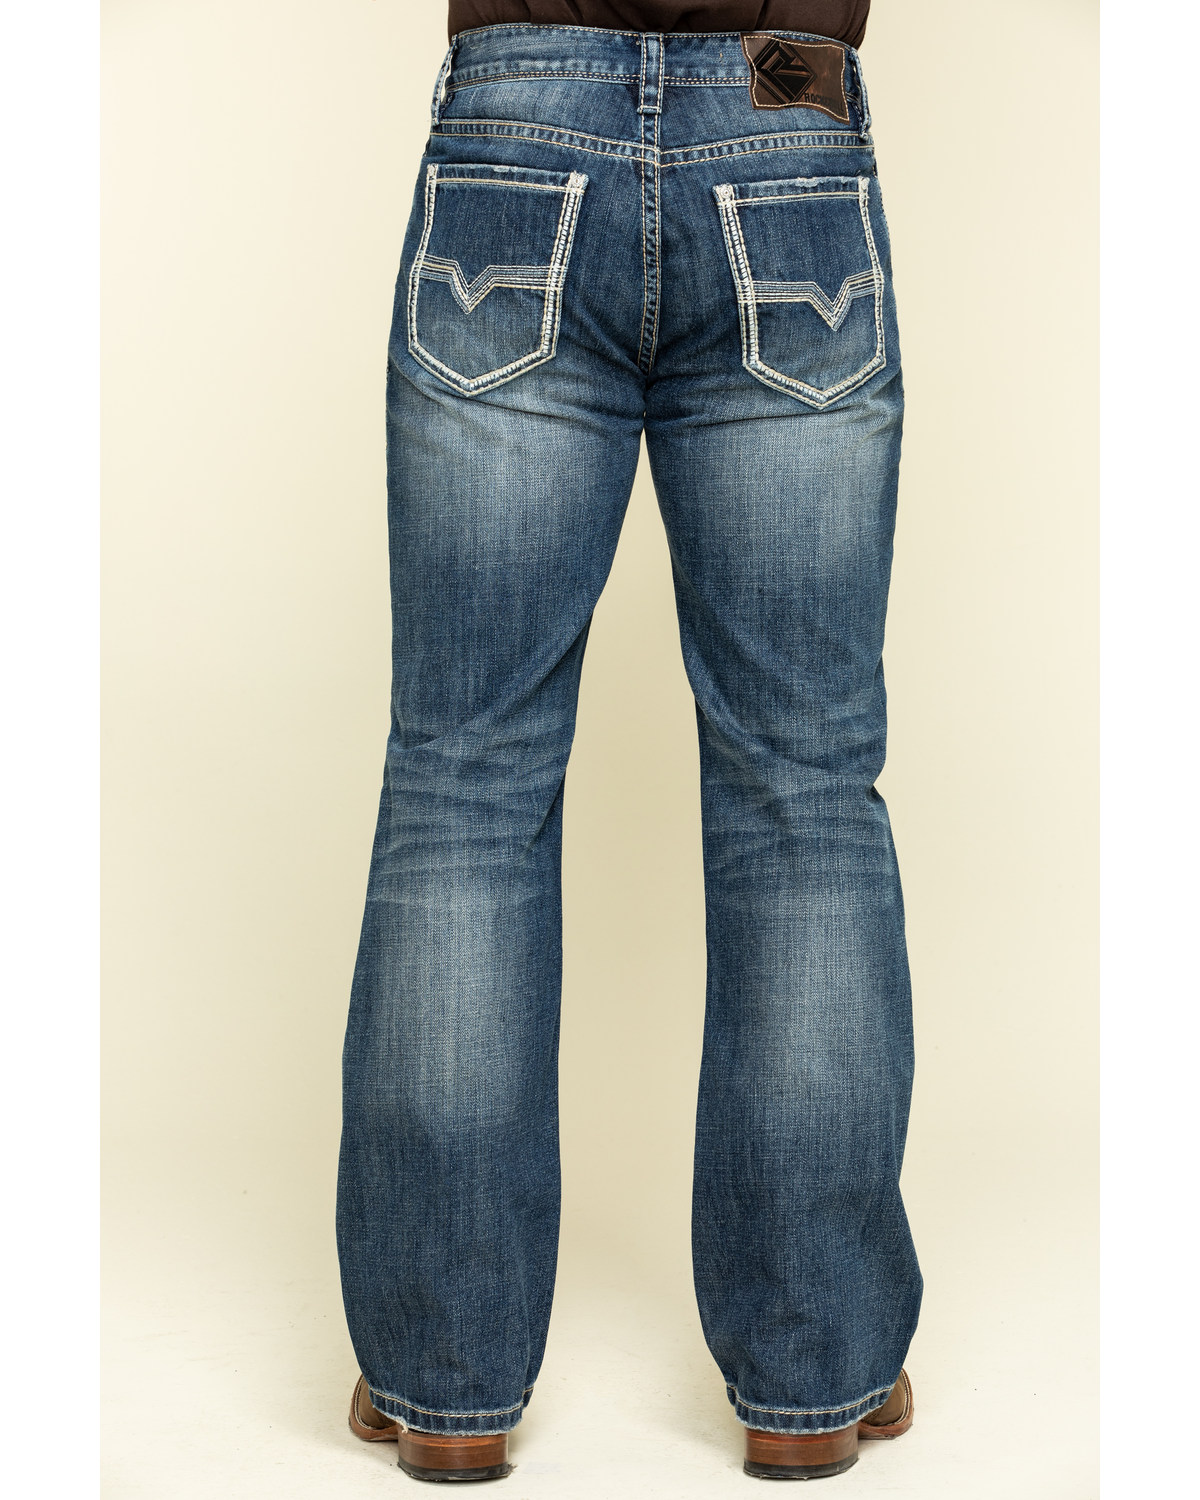 mens rock and roll jeans